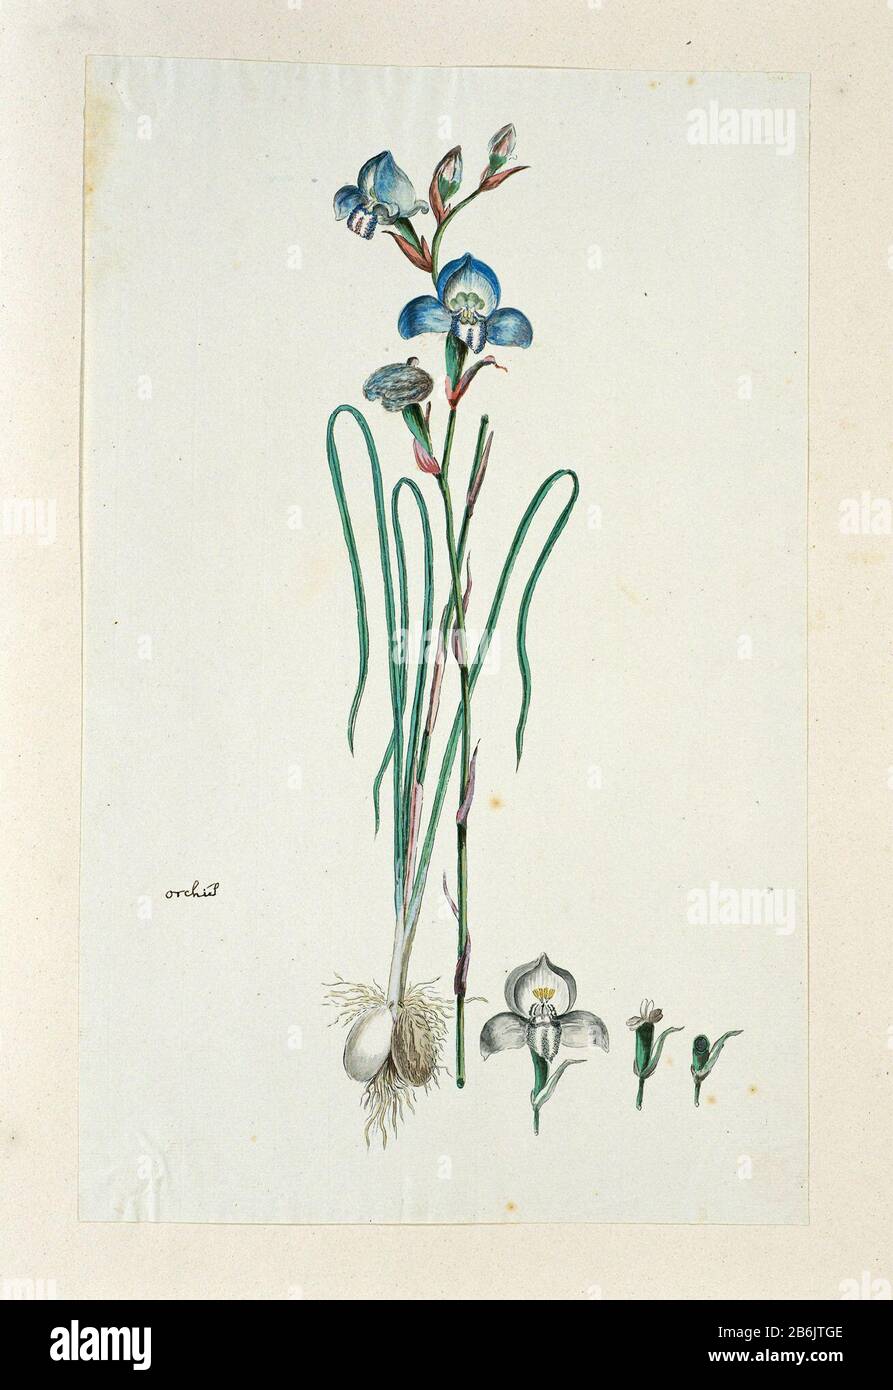 Disa graminiflolia Ker Gawl Ex Spreng orchis (titel op object) Disa graminiflolia Ker Gawl. Ex Spreng.orchis (title object) Property Type: Drawing album leaf Item number: RP-T-1914-18-44 Inscriptions / Brands: annotation, left, pen in brown: 'orchid' (Gordon's handwriting) Description: Disa graminifloia Ker Gawl. Ex Spreng. Manufacturer : artist: Robert Jacob Gordon Date: Oct 1777 - mar-1786 Physical features: brush in watercolor in colors, pencil and black chalk, pen and ink material: paper ink pencil crayon watercolor technique: pen / brush size: album sheet: H 660 mm × W 480 mmblad: h 424 m Stock Photo